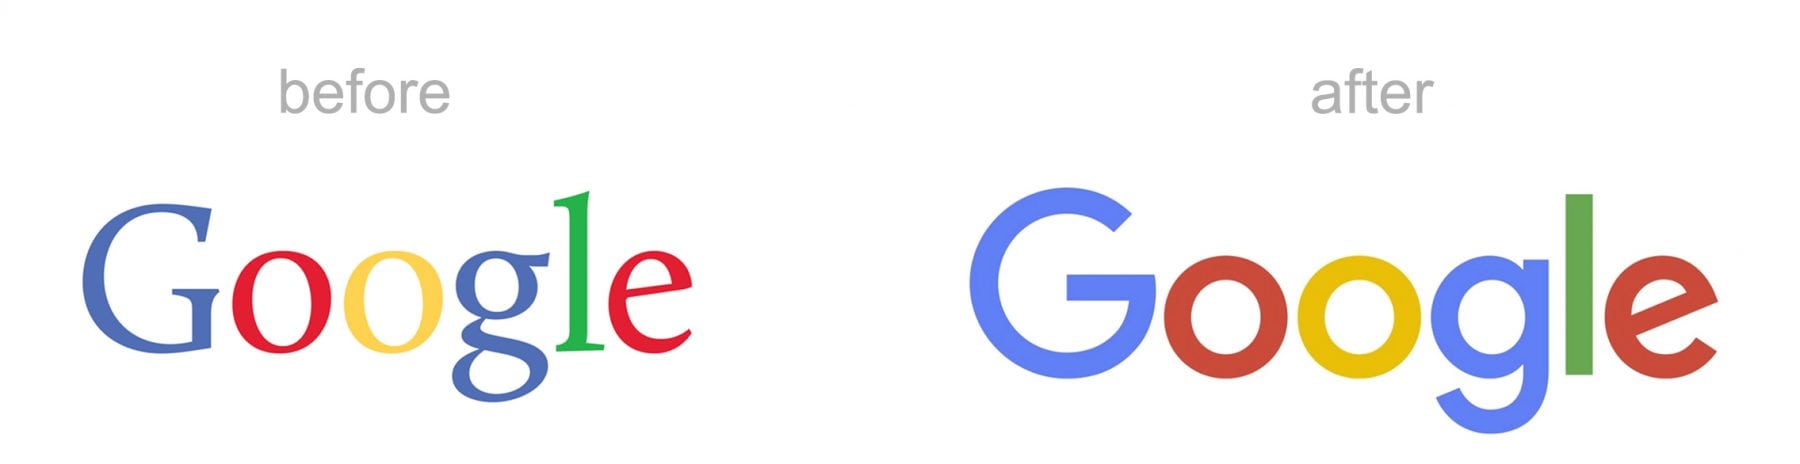 google-logo-redesign-before-and-after